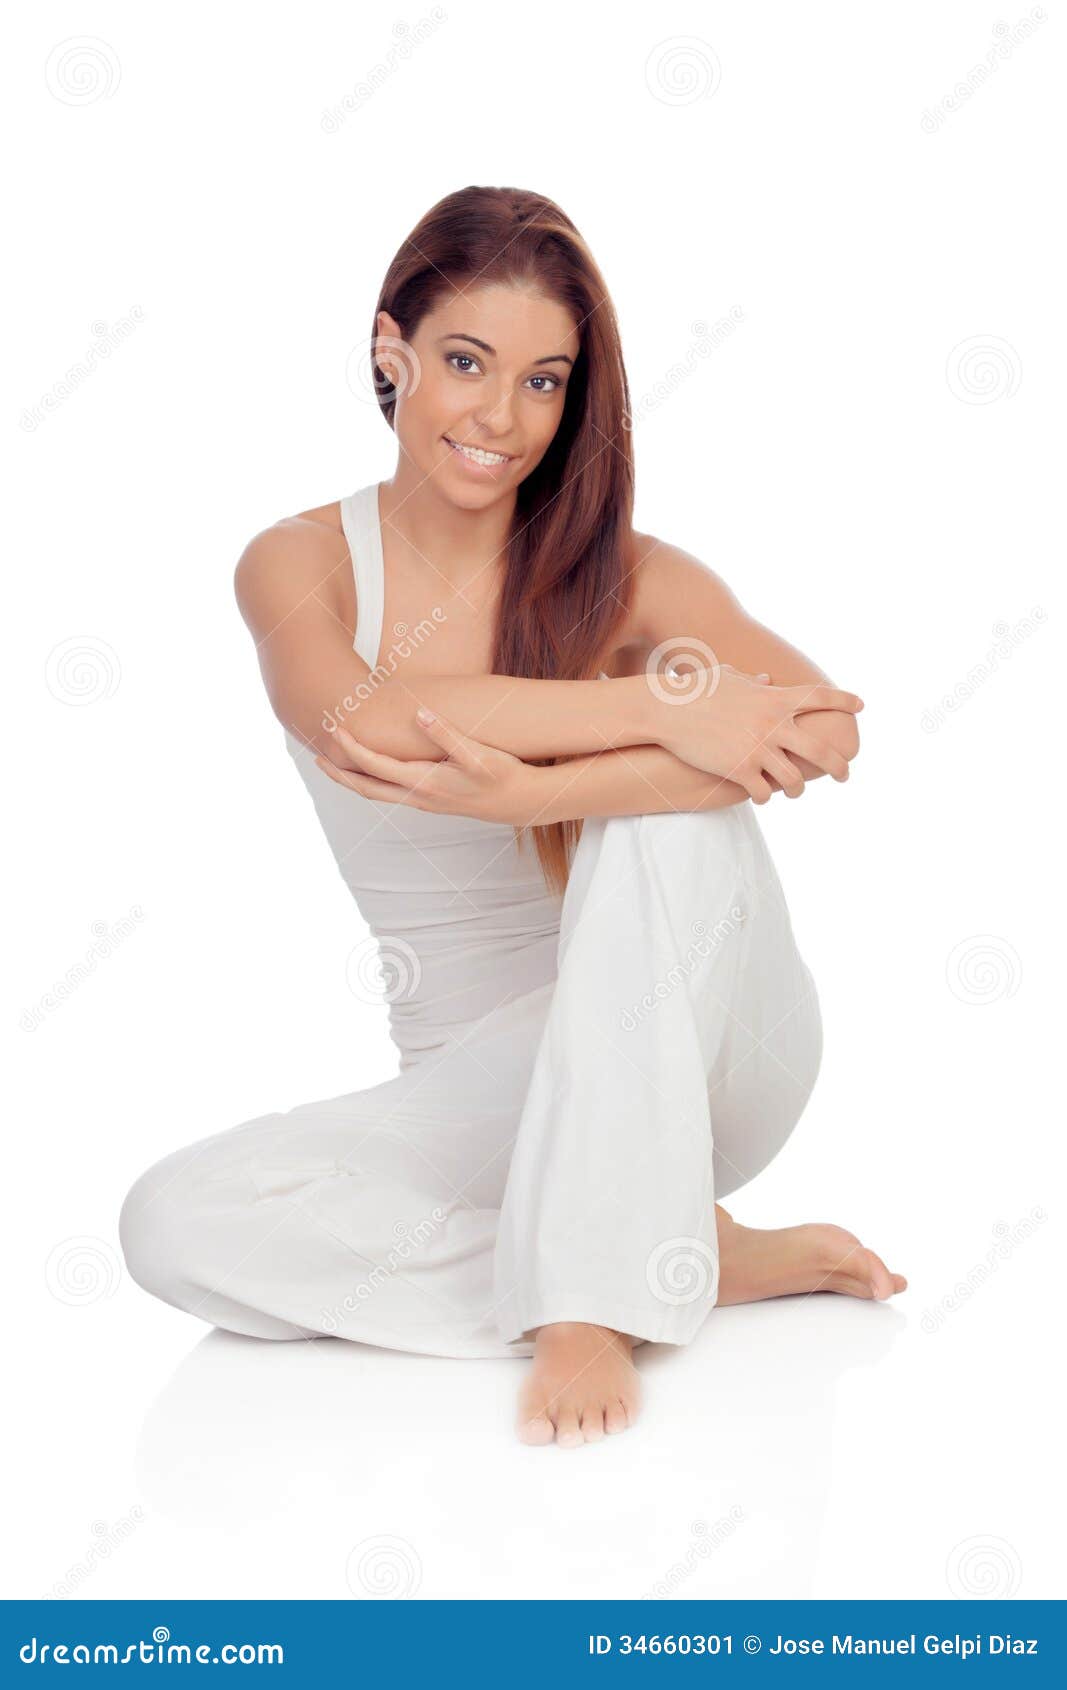 happy-young-woman-white-comfortable-clothing-sitting-floor-isolated-34660301.jpg